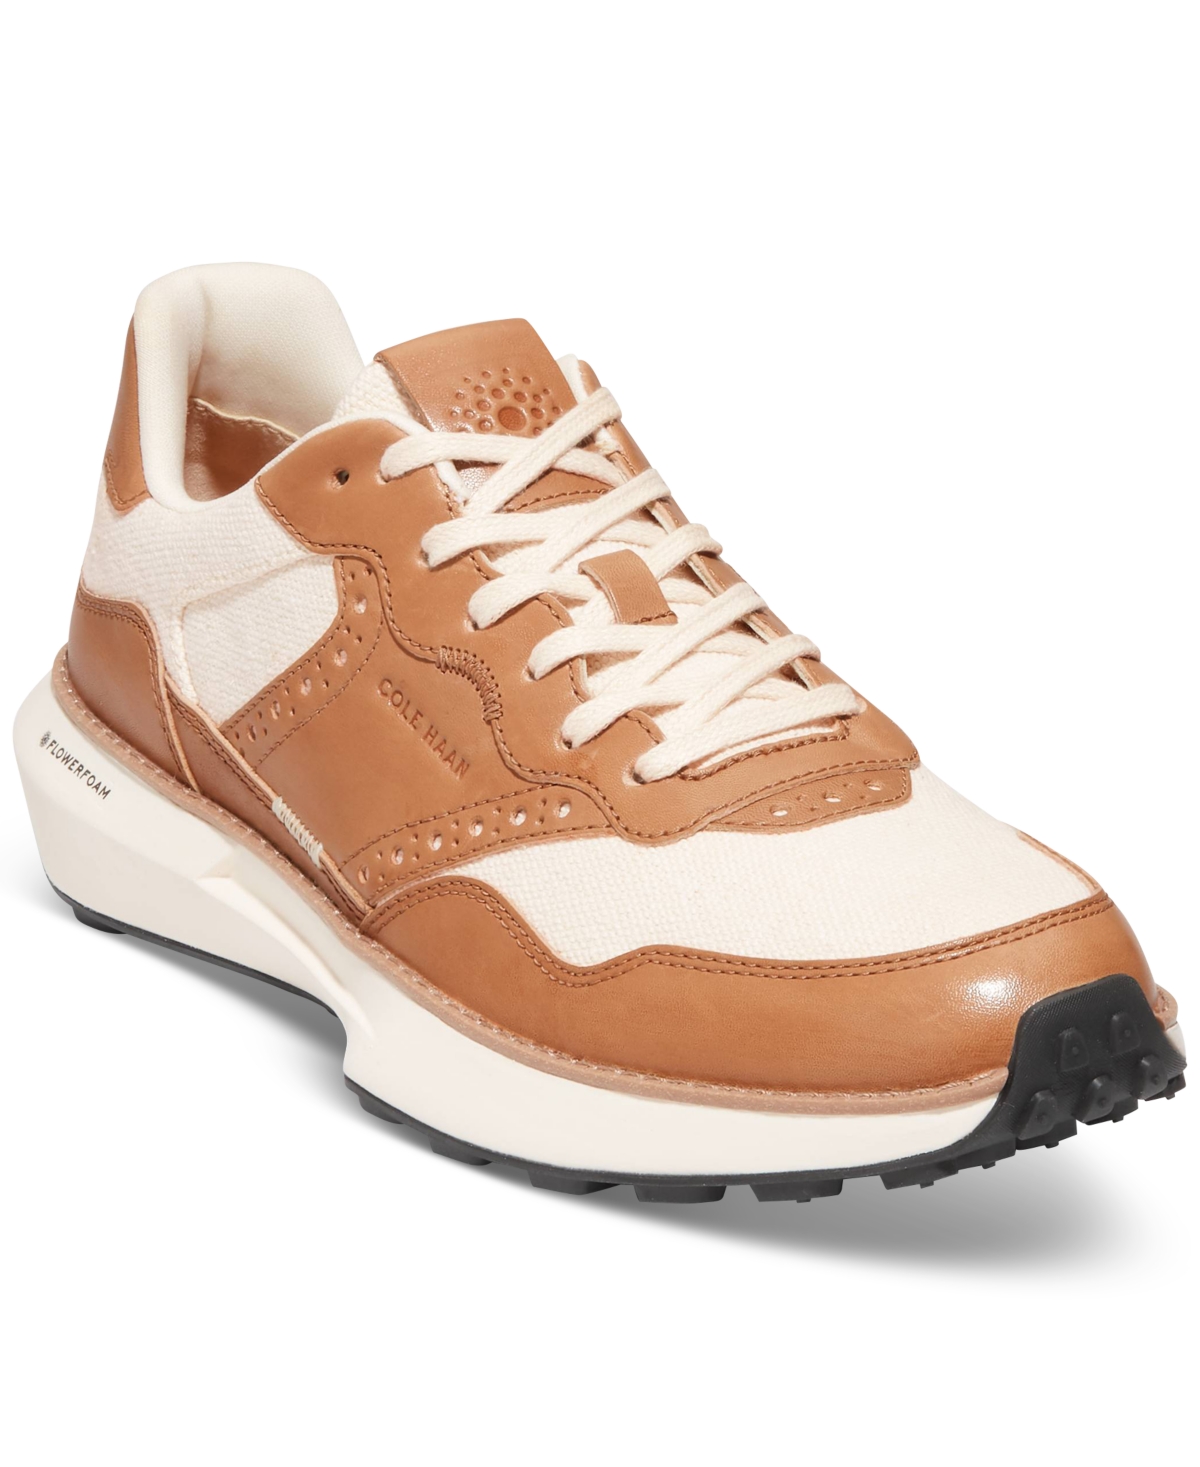 Men's GrandPrø Ashland Lace-Up Sneakers - Pecan Brown/Natural Canvas/Ivory